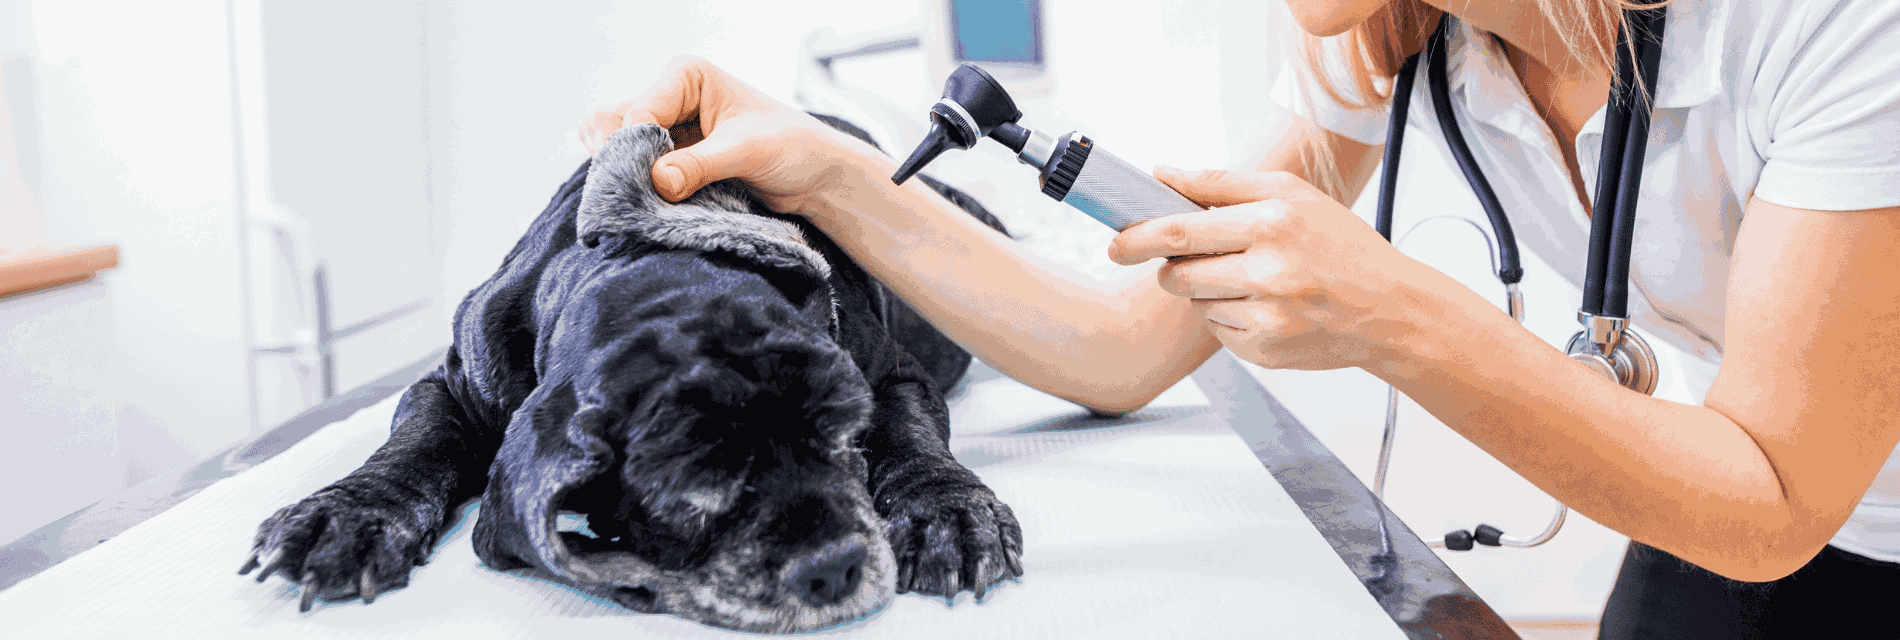 Skin Cancer Lump On Dog: Signs, Diagnosis & Treatment Options